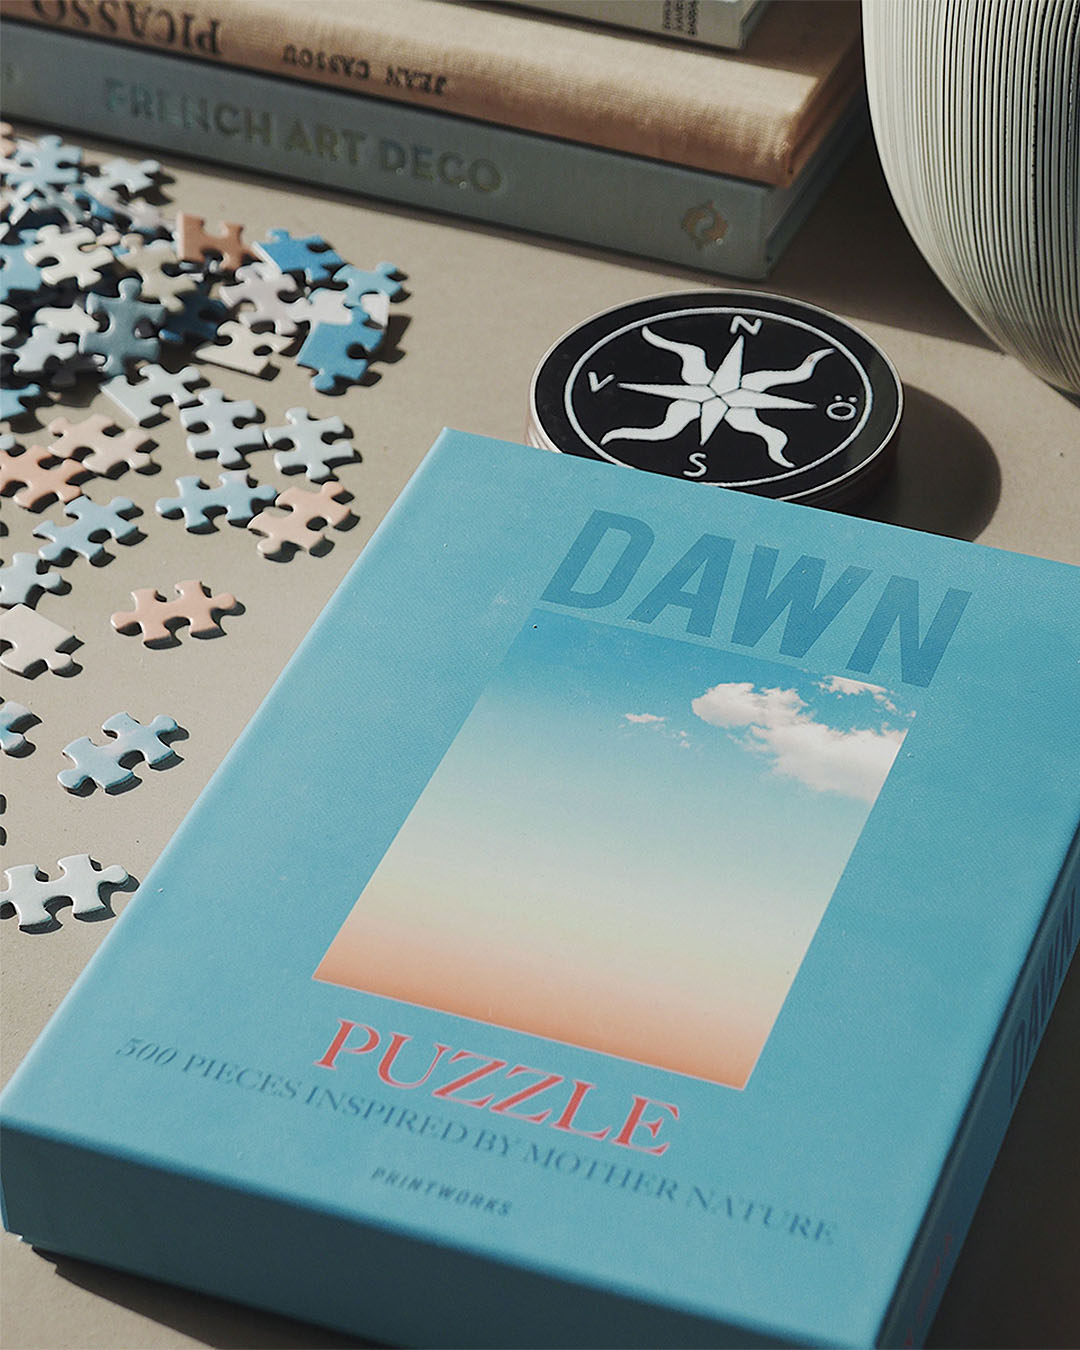 A Printworks dawn puzzle on a table.